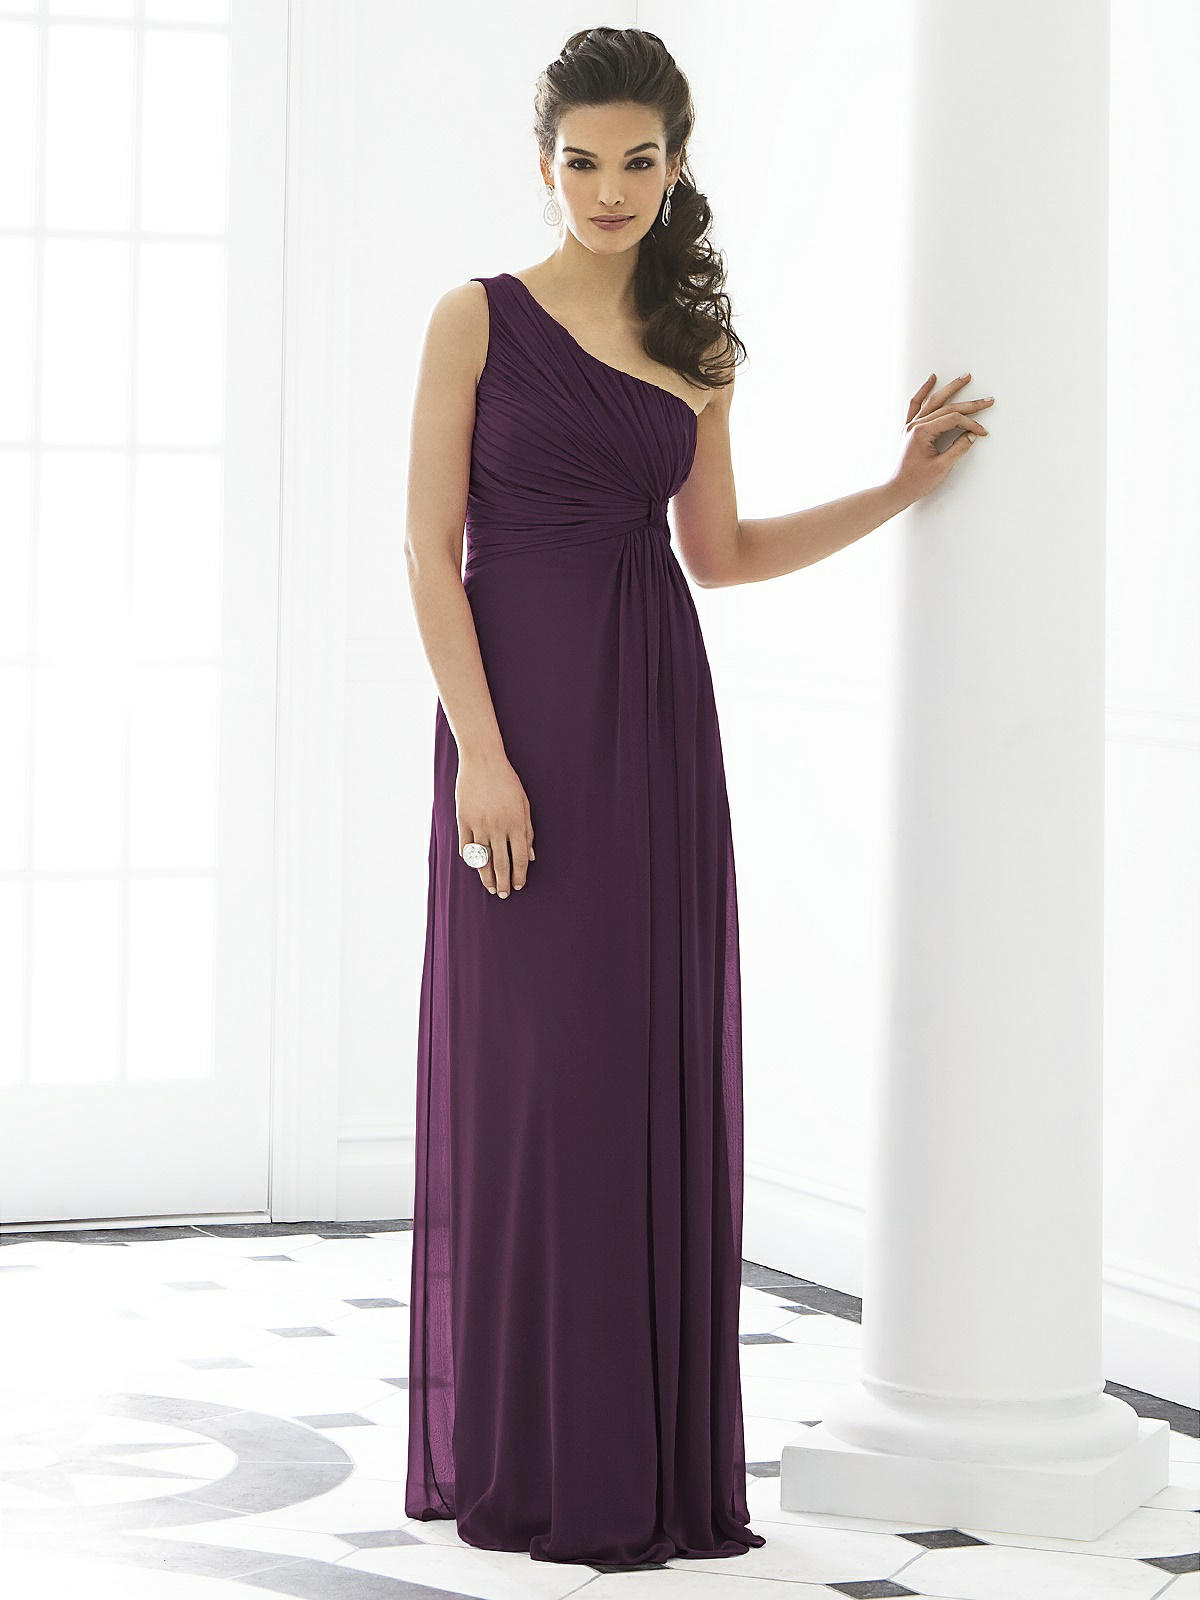 How Much Are Dessy Bridesmaid Dresses